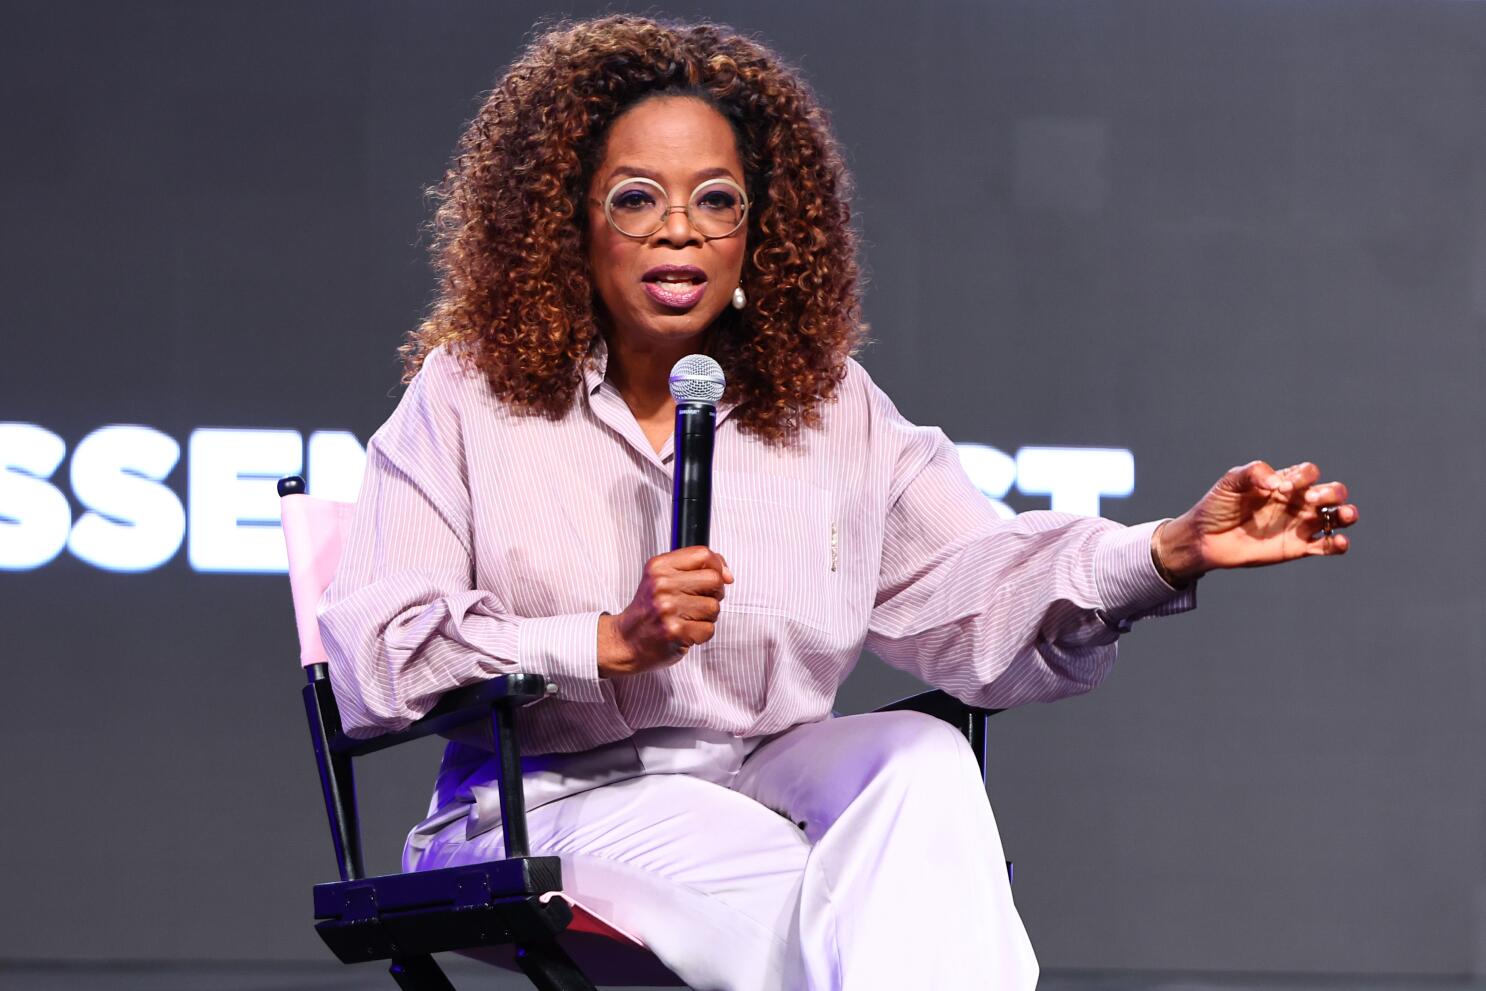  Oprah Winfrey Reveals She Has Never Attended Therapy Despite Mental Health Struggles